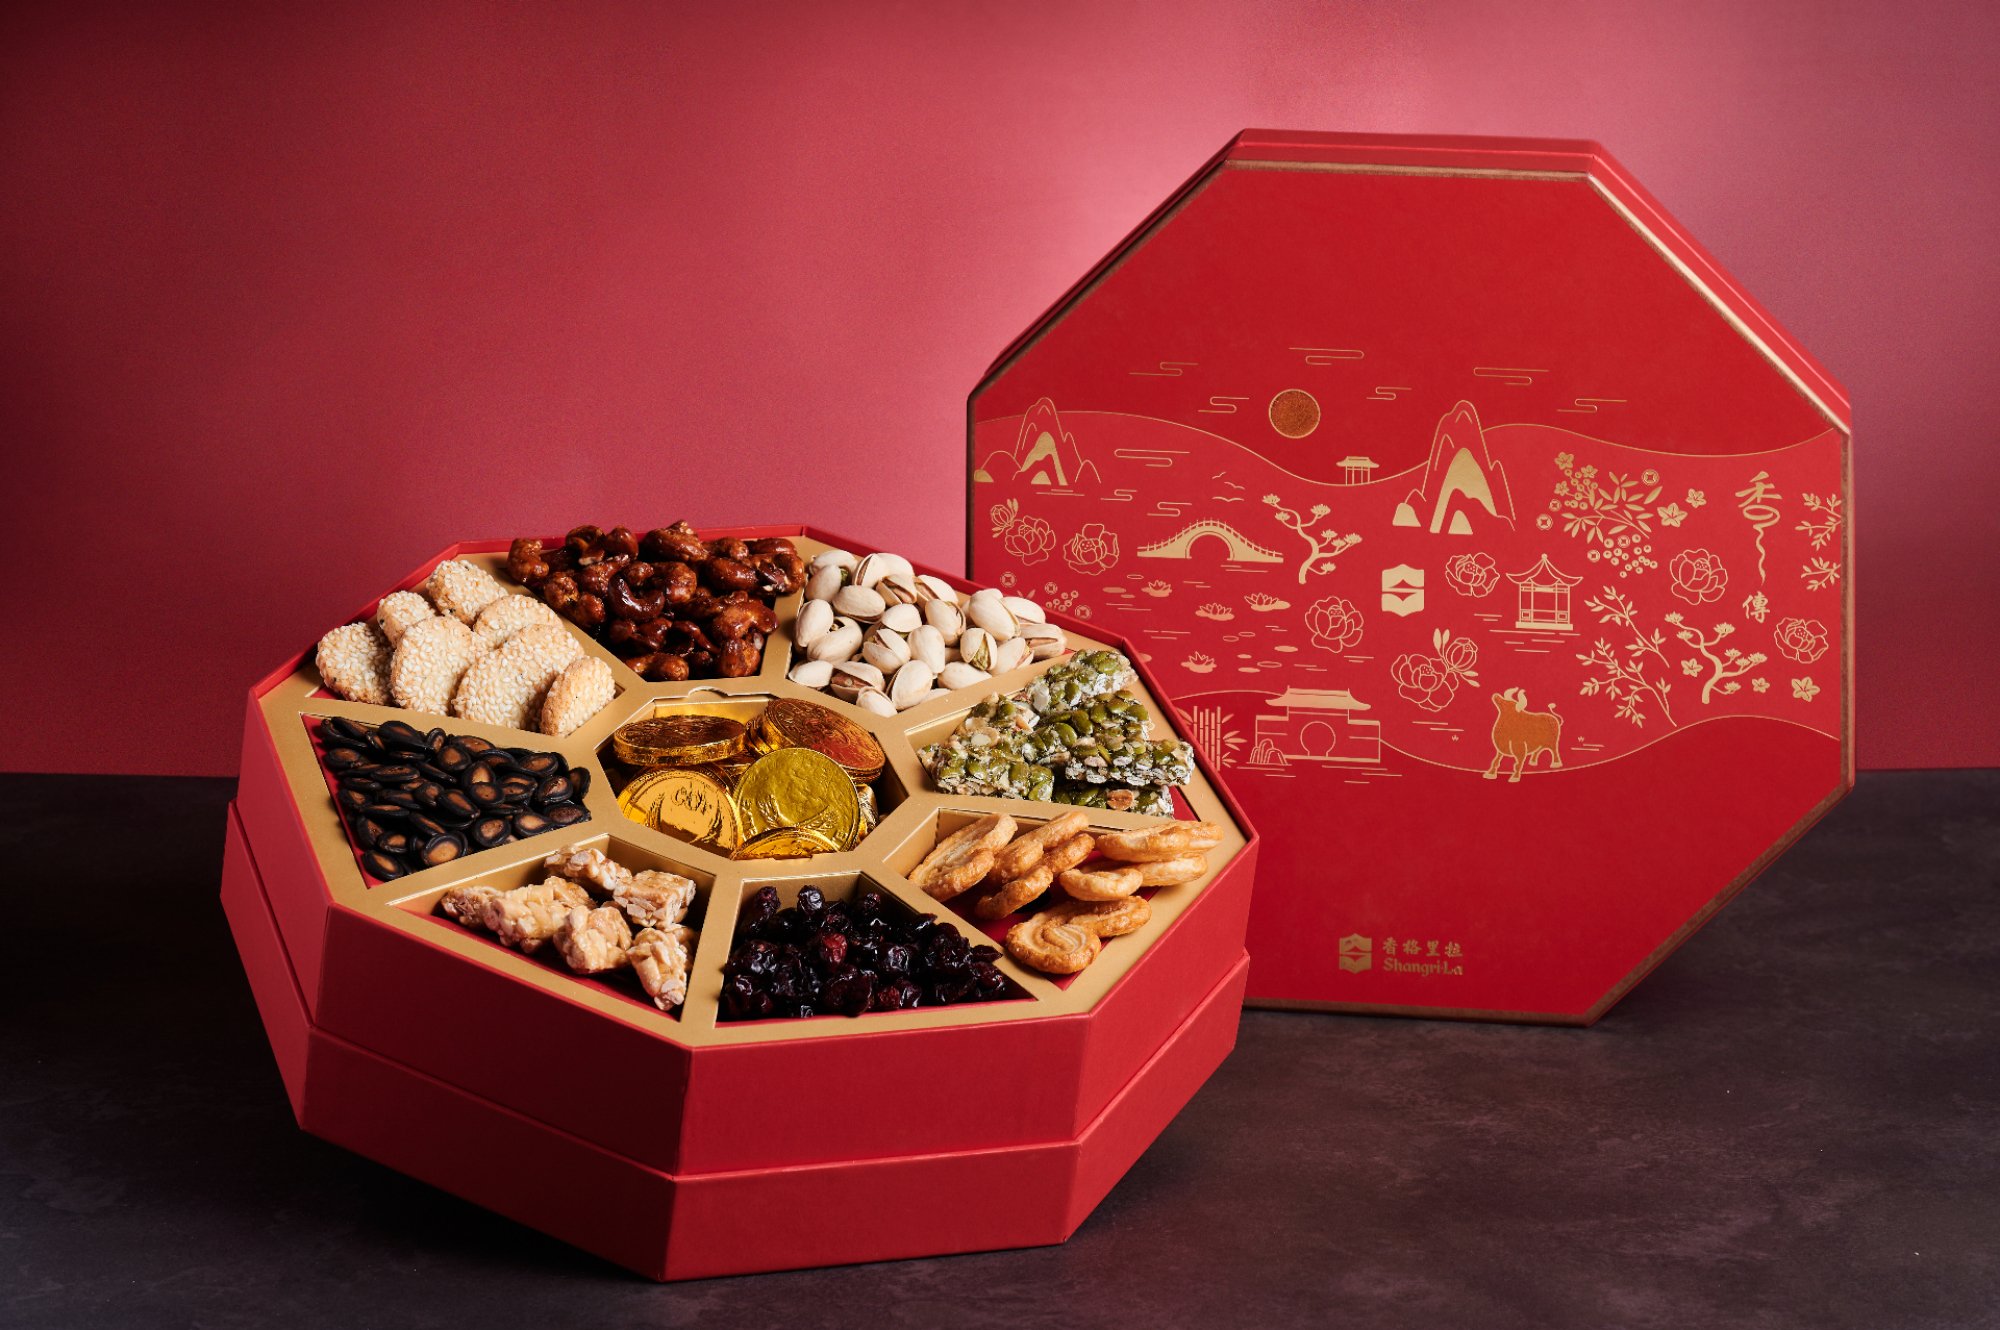 What is the Lunar New Year chuen hup, or candy box, and what are